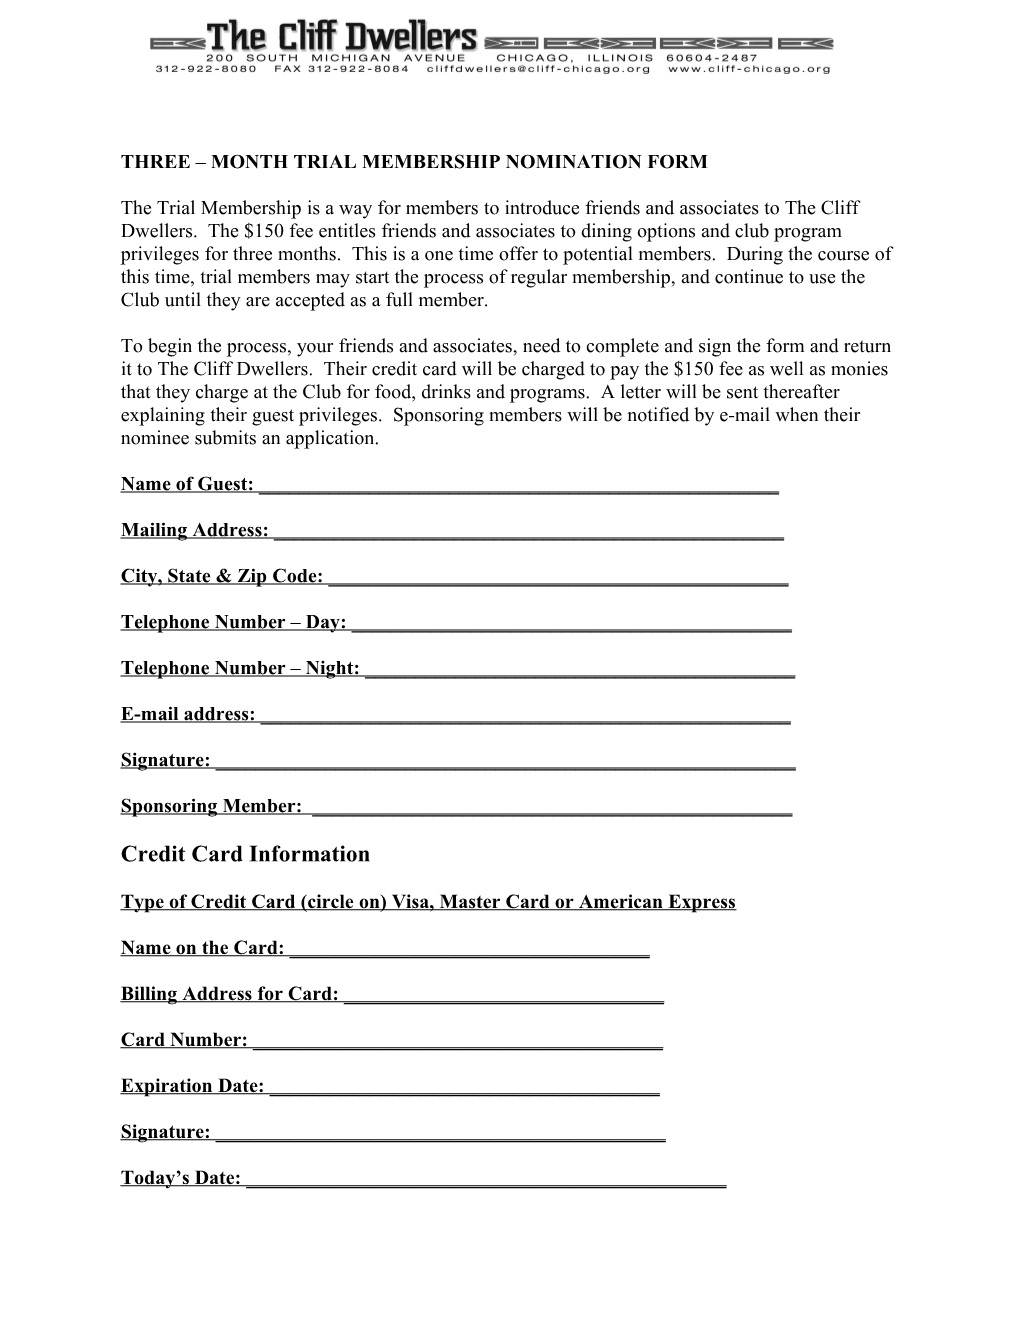 Three Month Trial Membership Nomination Form